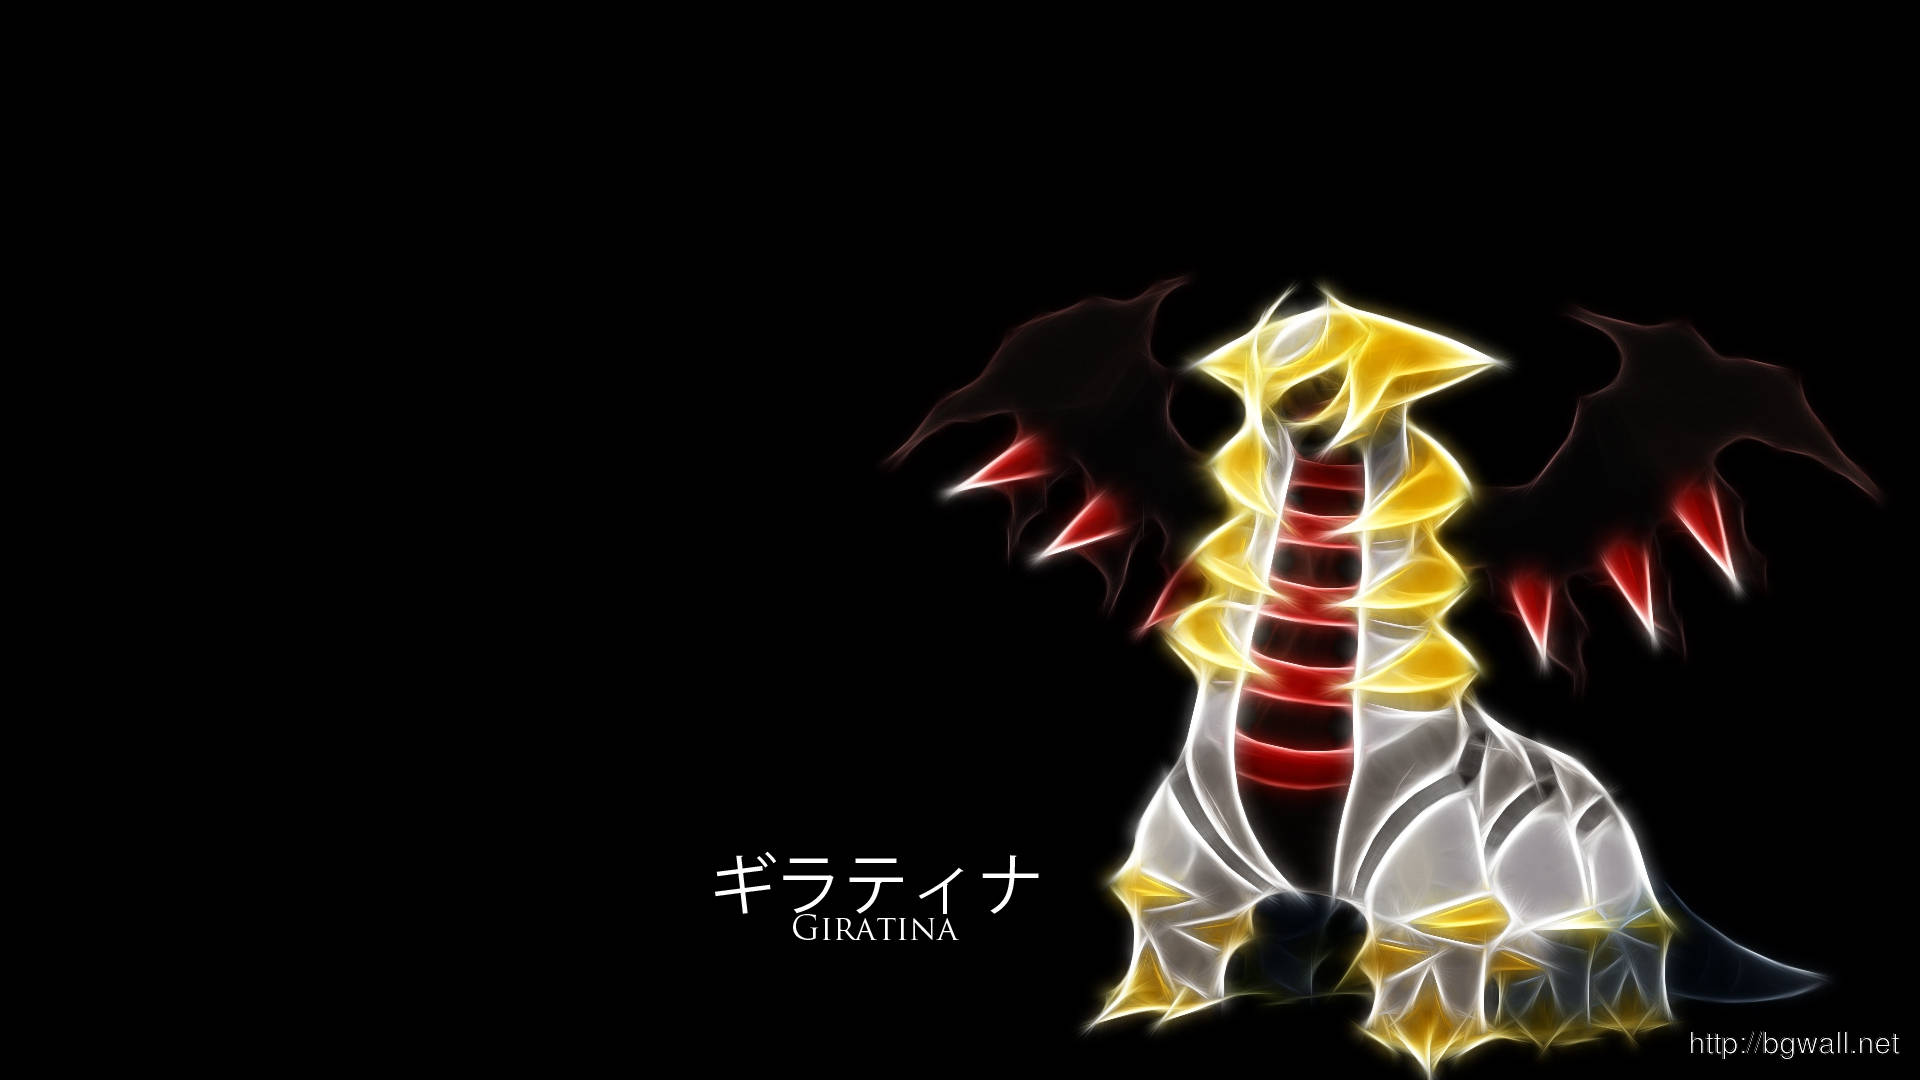 Formless As The Void – Neon Art Giratina Background